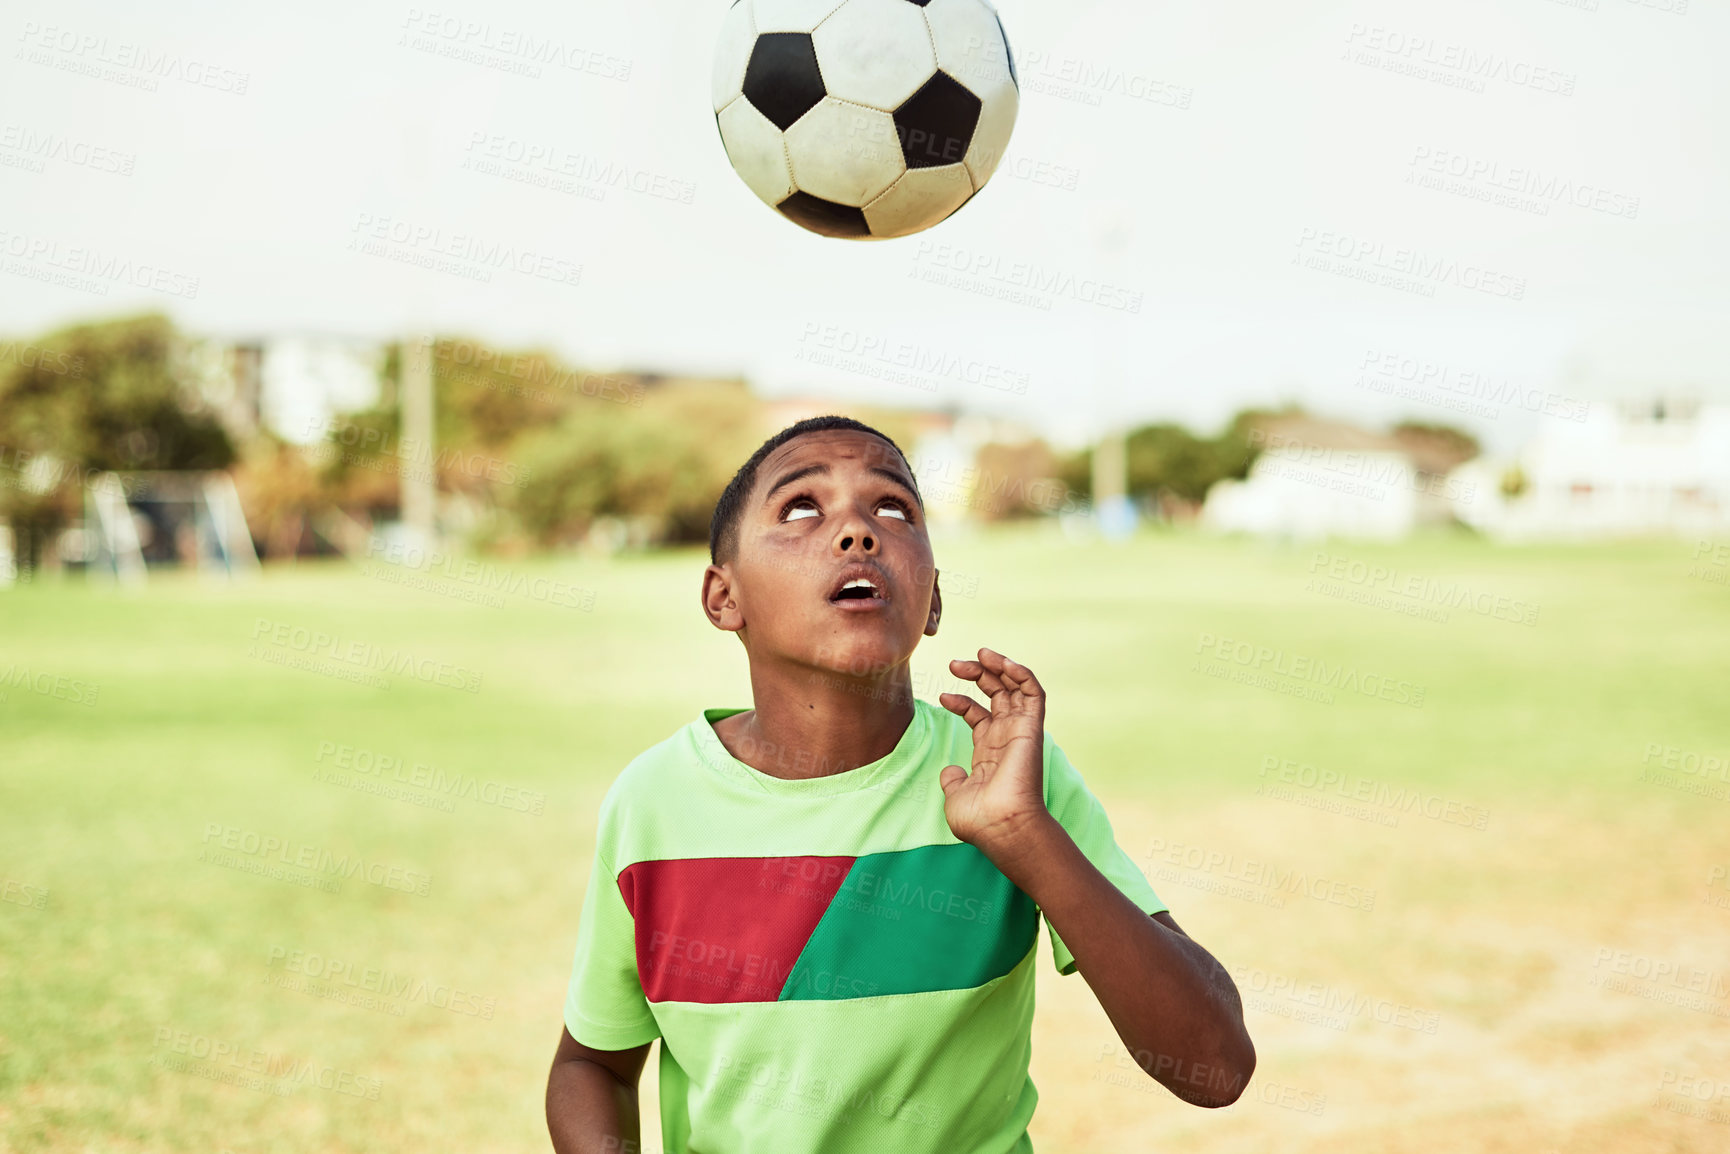 Buy stock photo Shot of a young boy playing soccer on a sports field